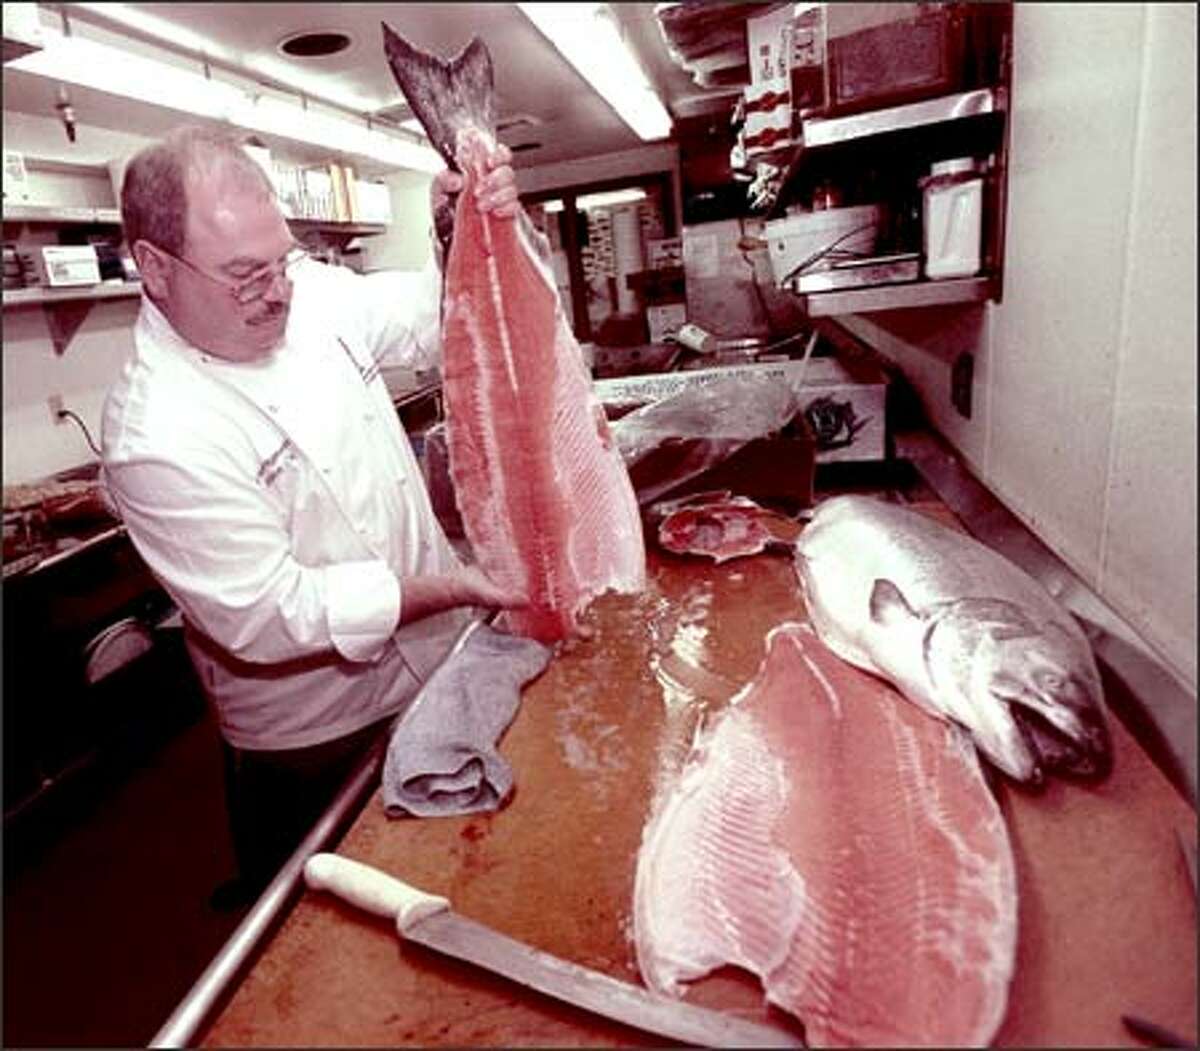 Ray's Boathouse executive chef Charles Ramseyer fillets a king salmon following a news conference yesterday. Opponents of genetically modified fish fear that they will put wild fish stocks at risk.